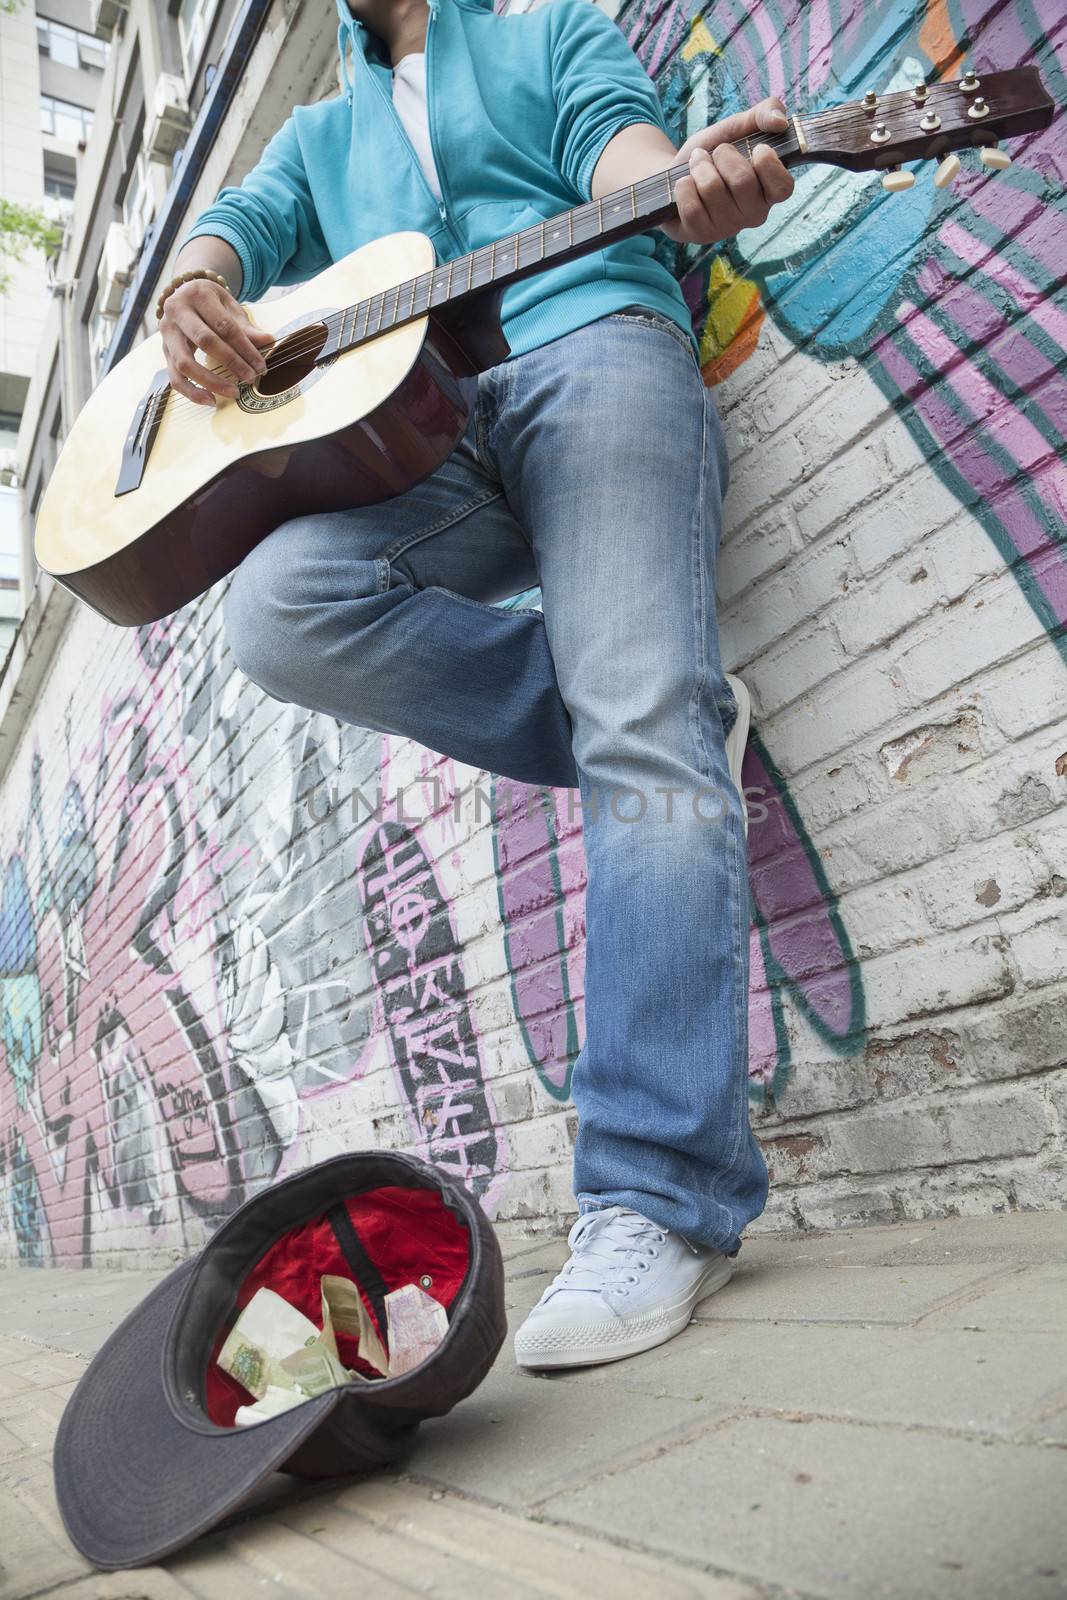 Young street musician playing guitar and busking for money in front of a wall with graffiti